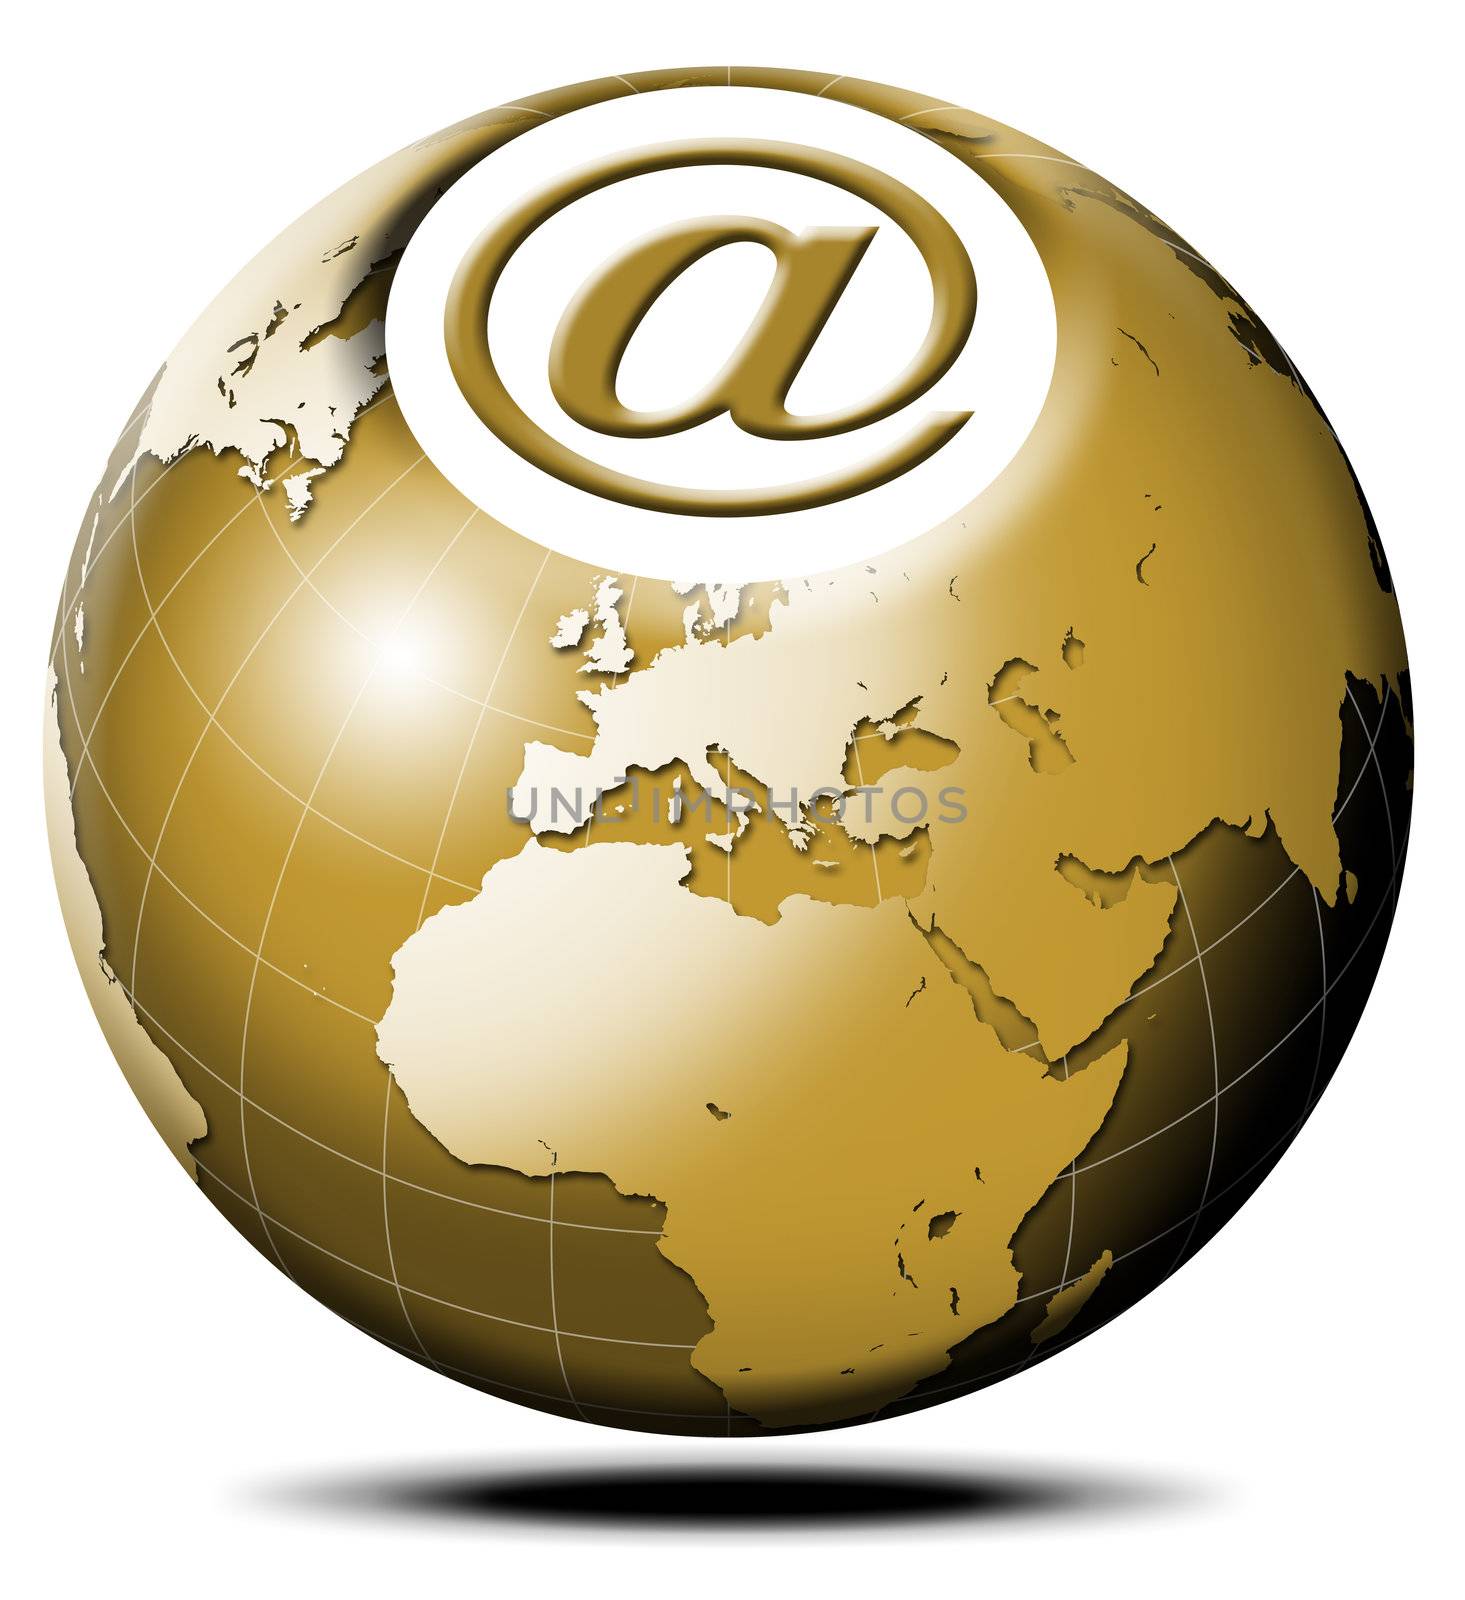 e-mail global by catalby